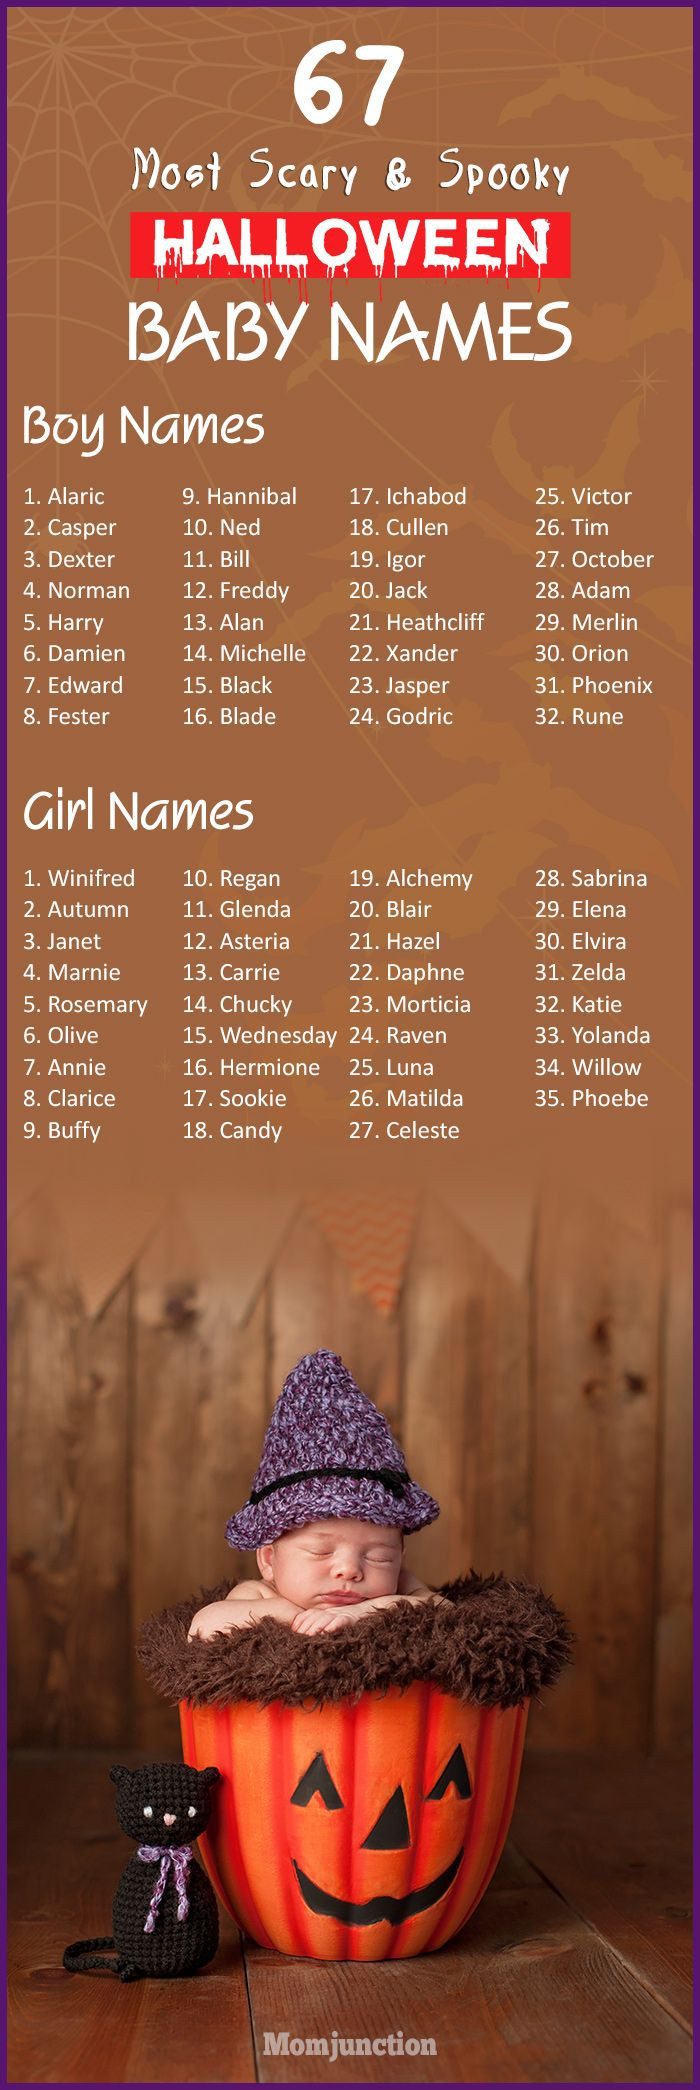 Halloween Party Name Ideas
 67 Most Scary And Spooky Halloween Names For Your Baby